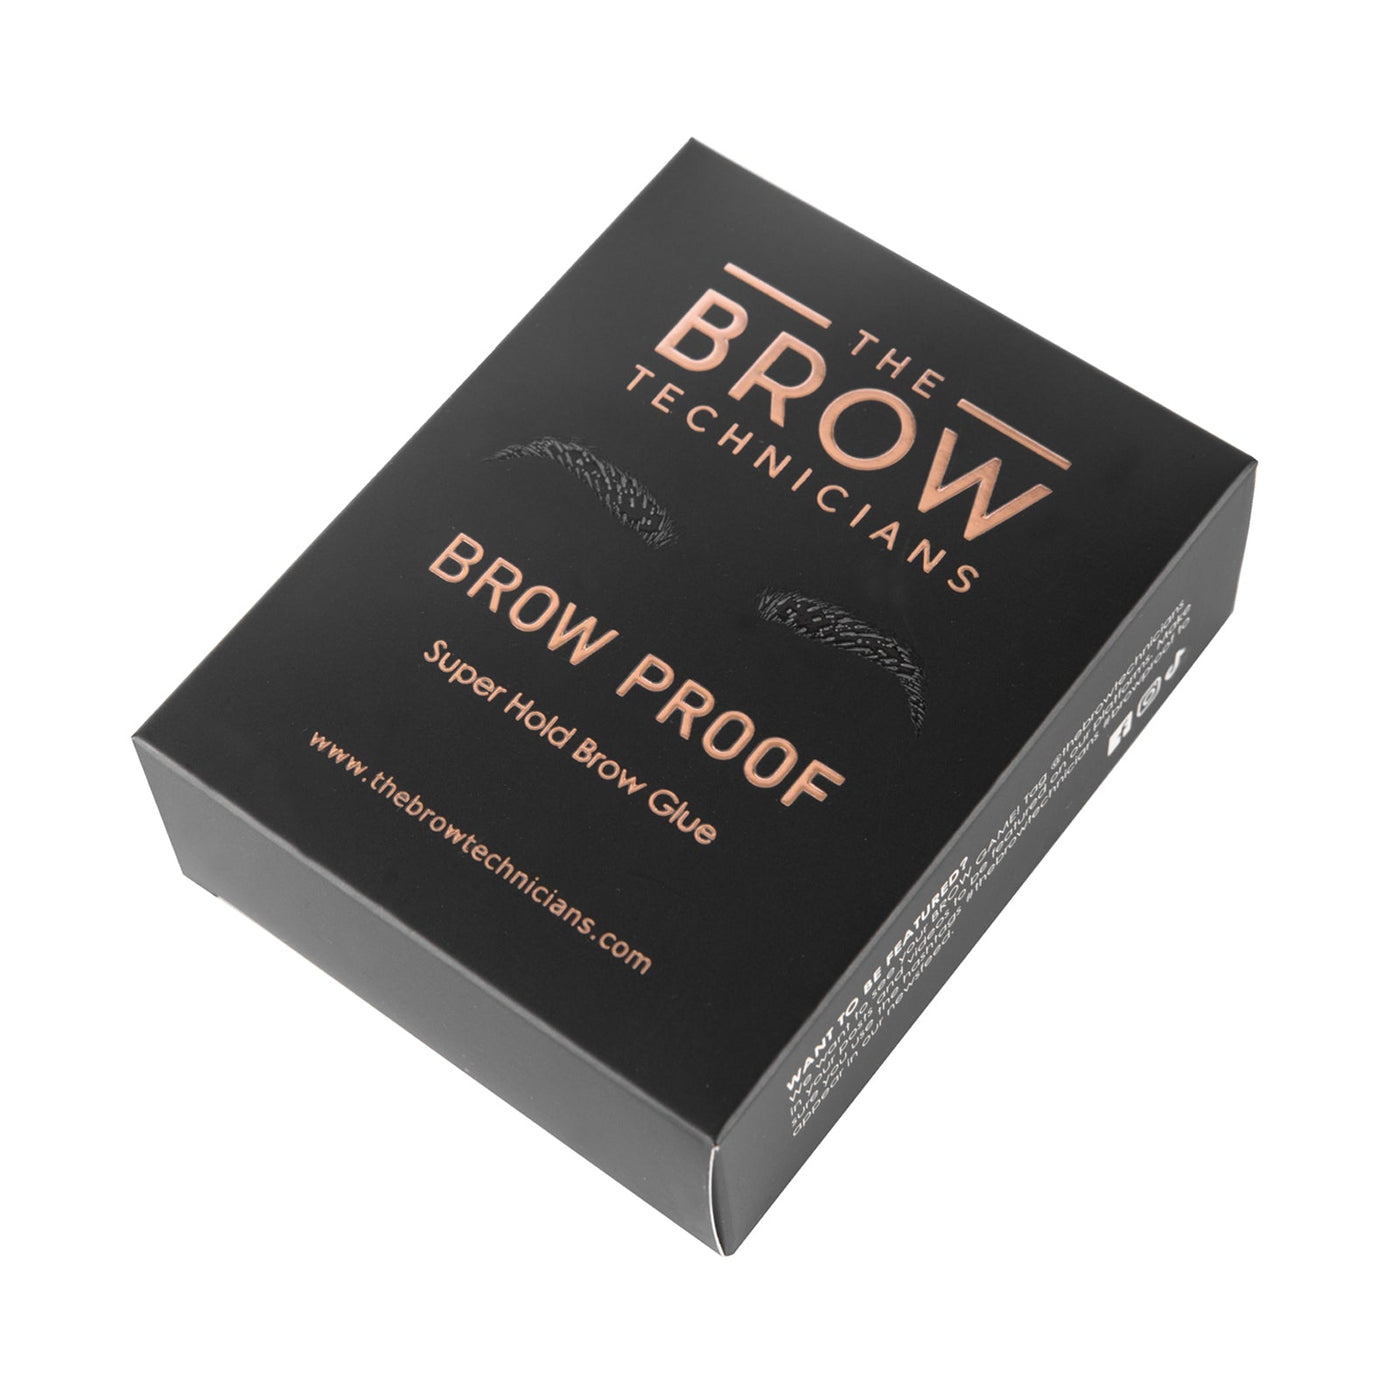 The Brow Technicians Brow Proof Super Hold Clear Brow Glue packaging